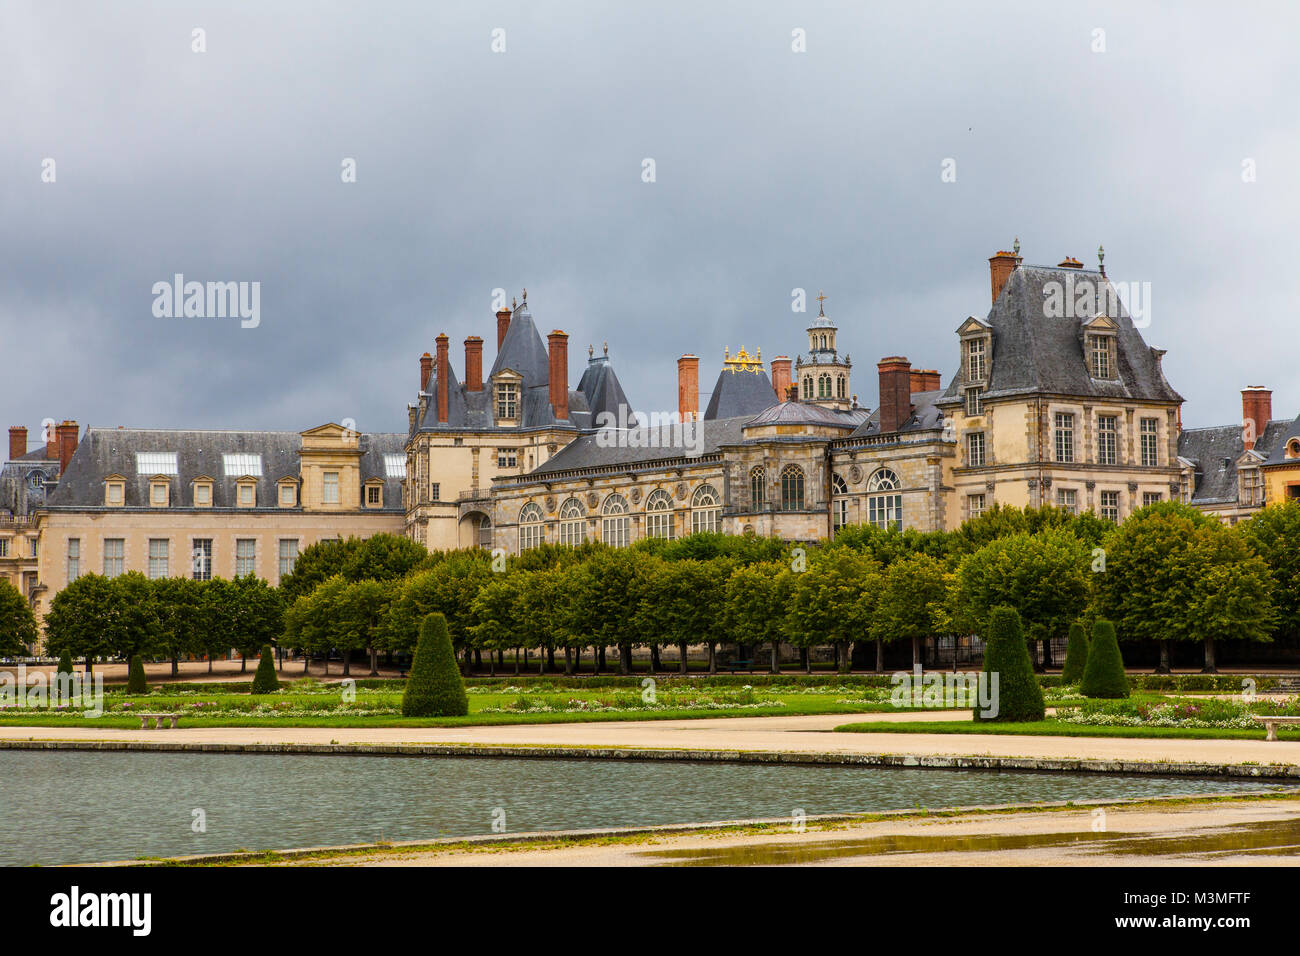 Royal hunting castle Fontainbleau. Palace of Fontainebleau - one of largest royal chateaux in France (55 km from Paris), UNESCO World Heritage Site. Stock Photo